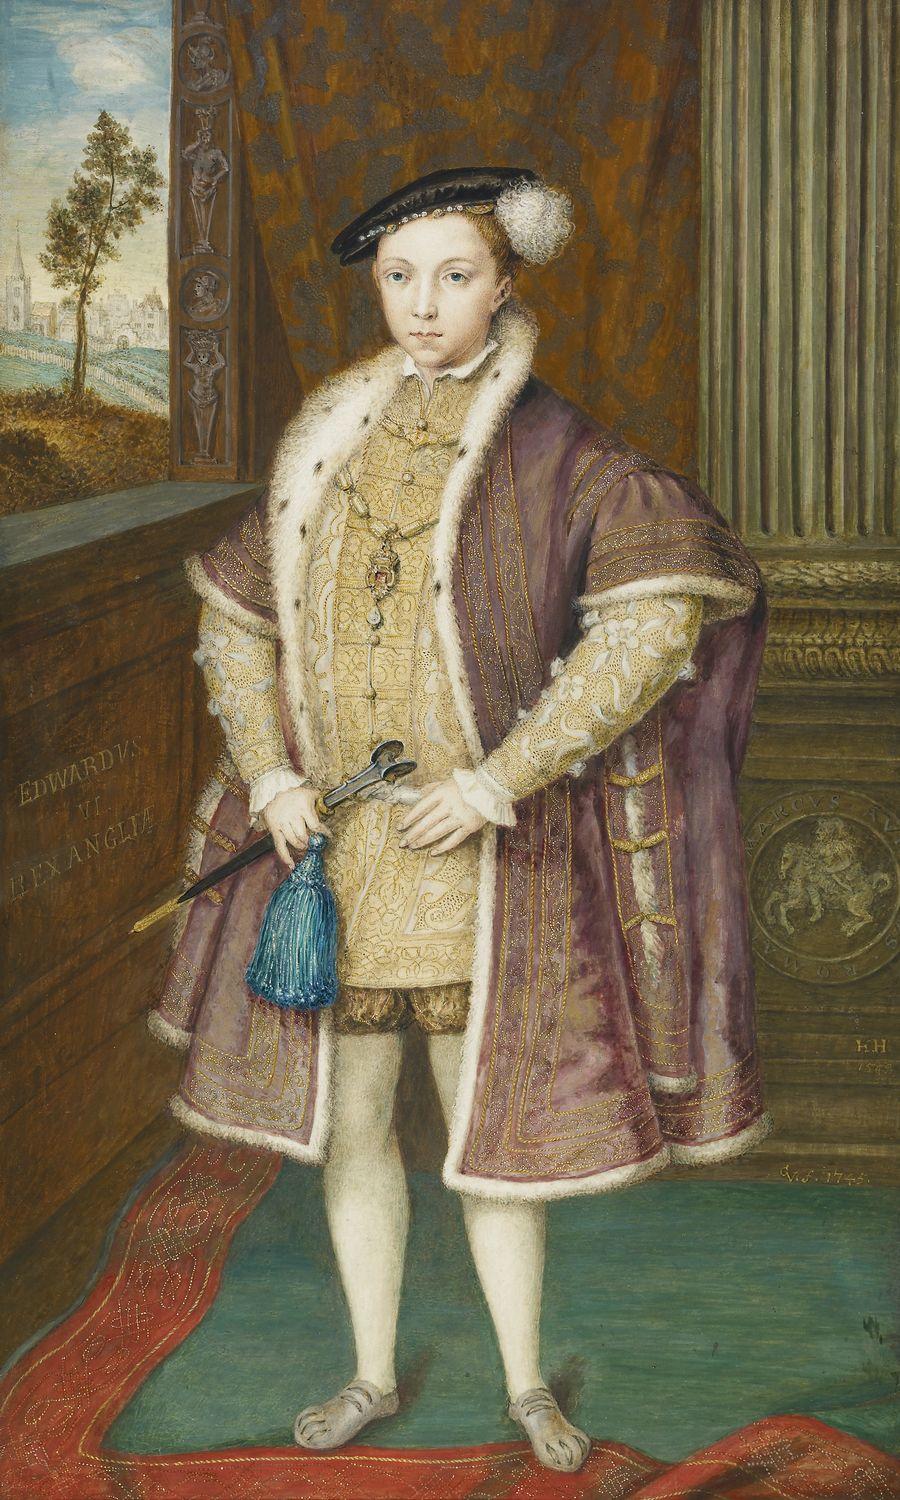 A watercolour portrait of Edward VI as a young boy, shown full length, wearing an ermine-lined cloak. After a portrait in the Royal Collection which is now attributed to William Scrots (RCIN 404441). This watercolour shows the state of the oil portrait, w